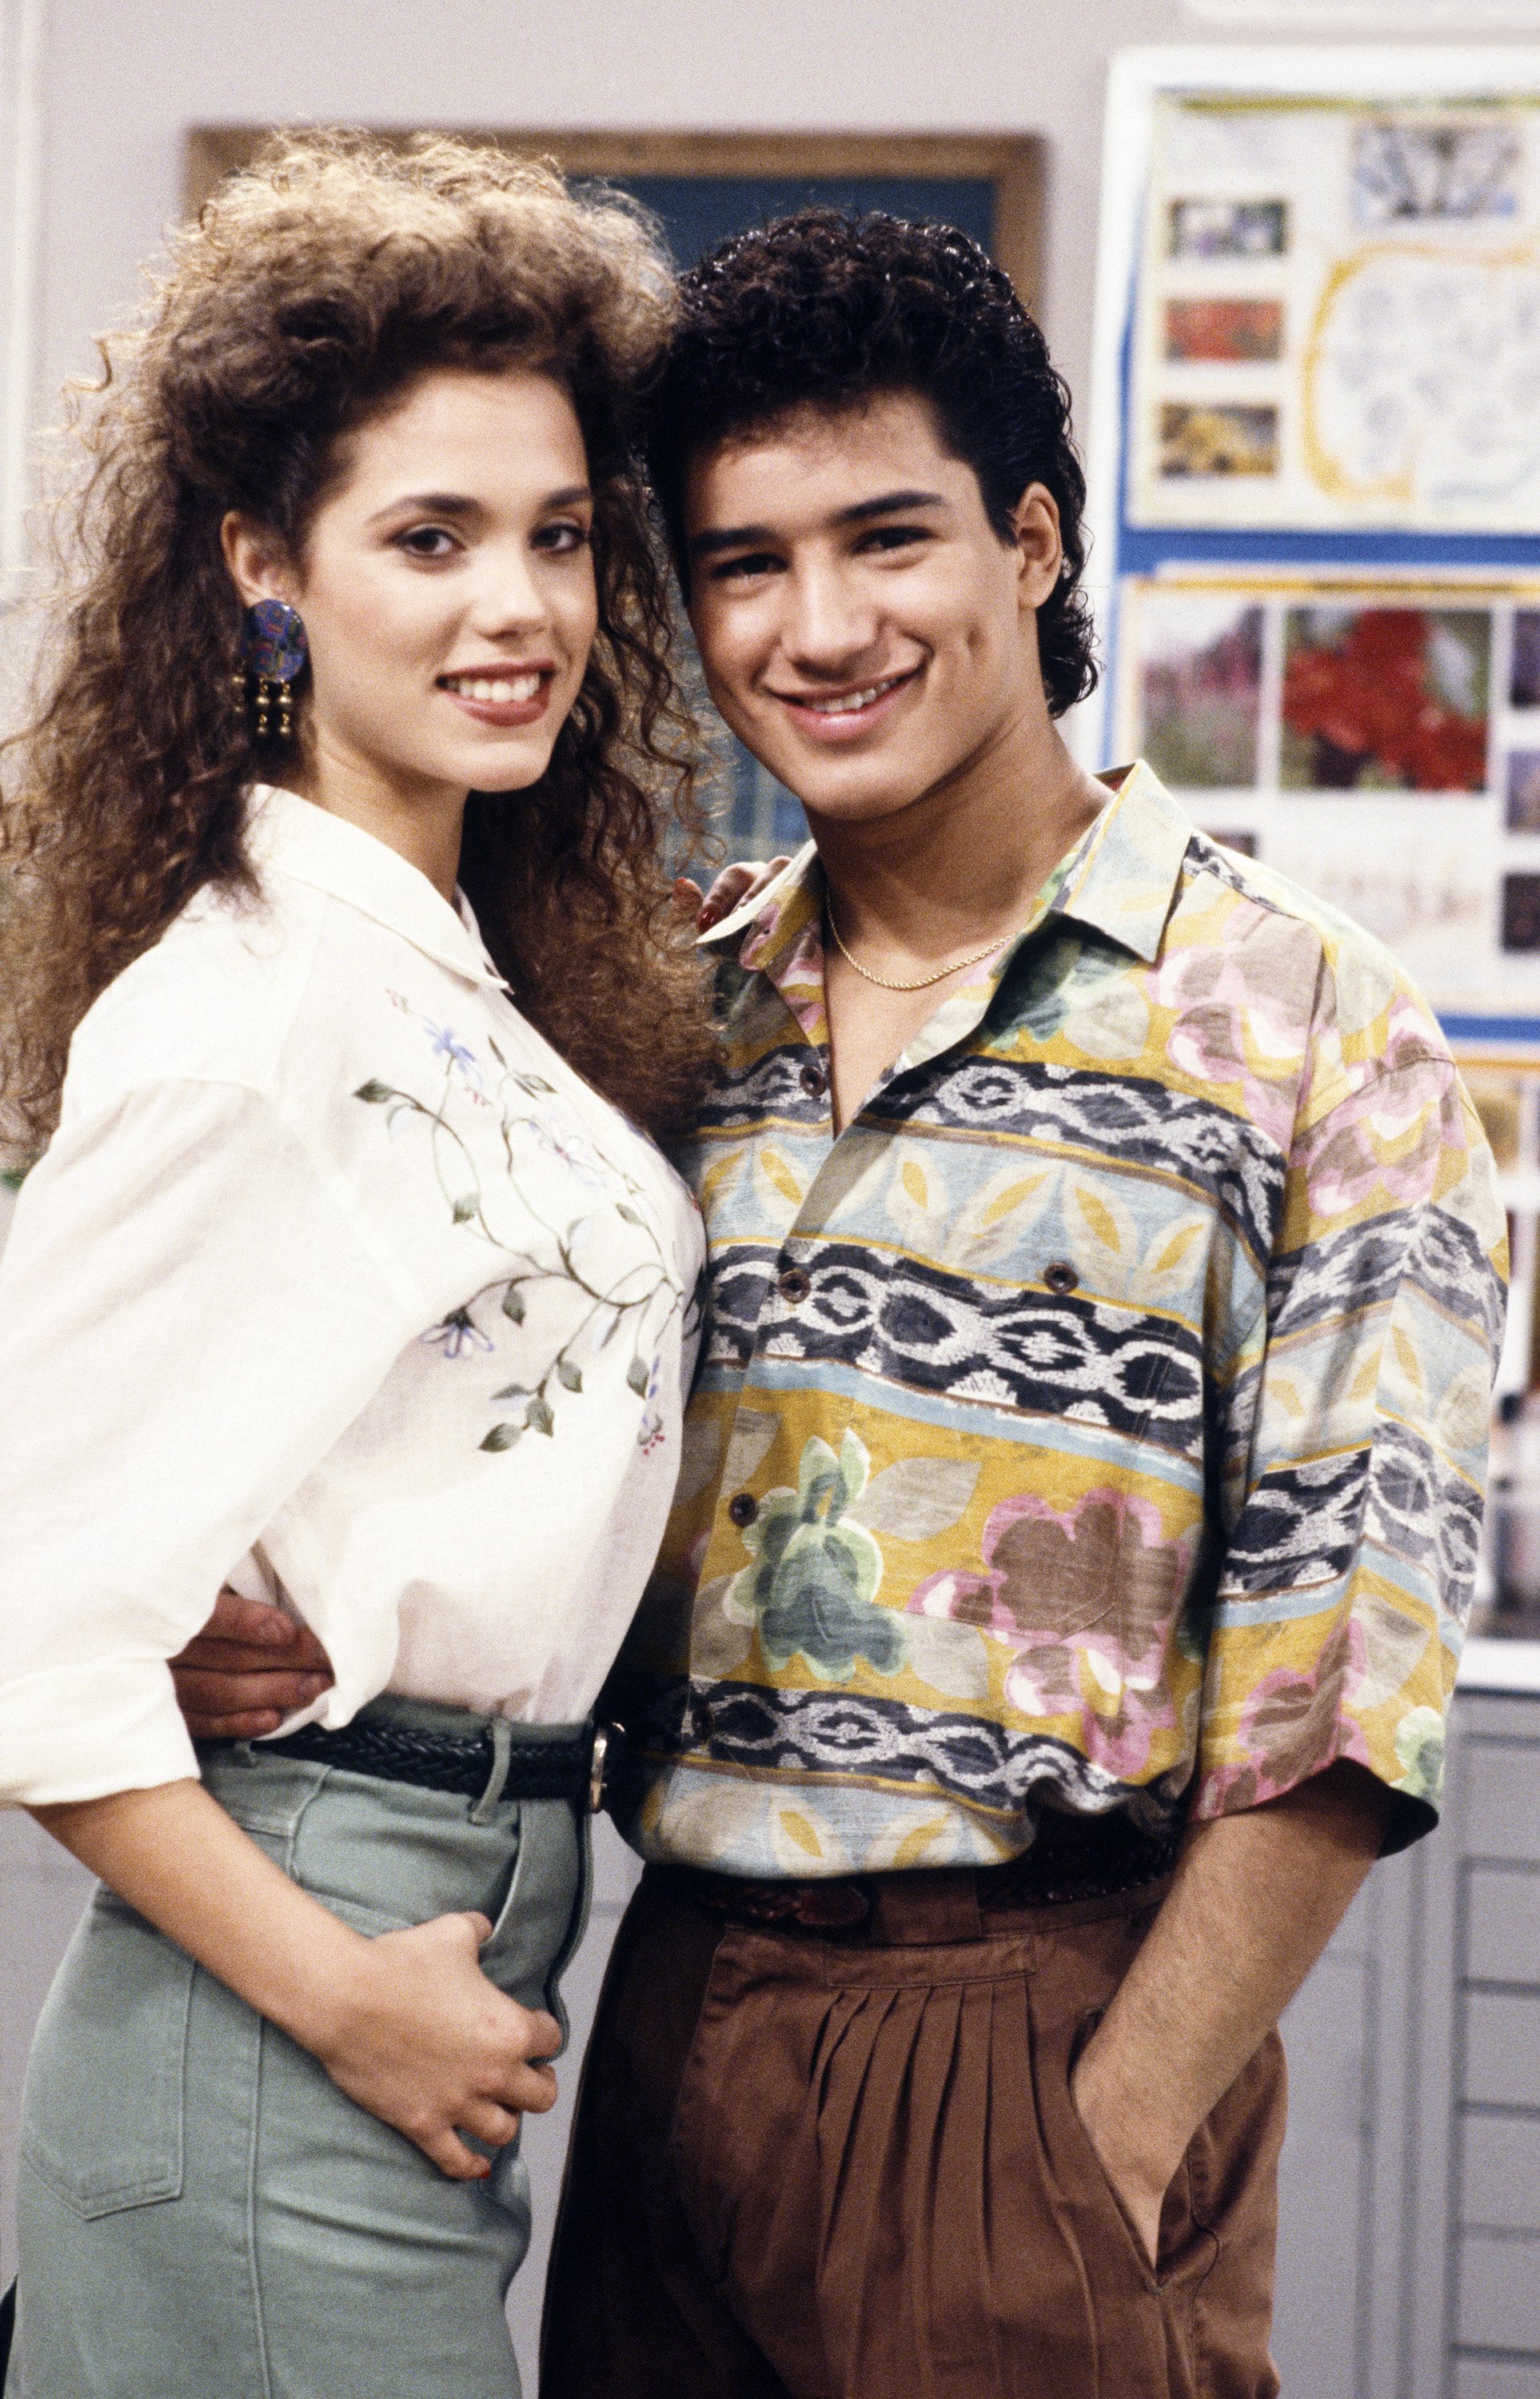 Her on-screen boyfriend was Mario Lopez playing A.C. Slater